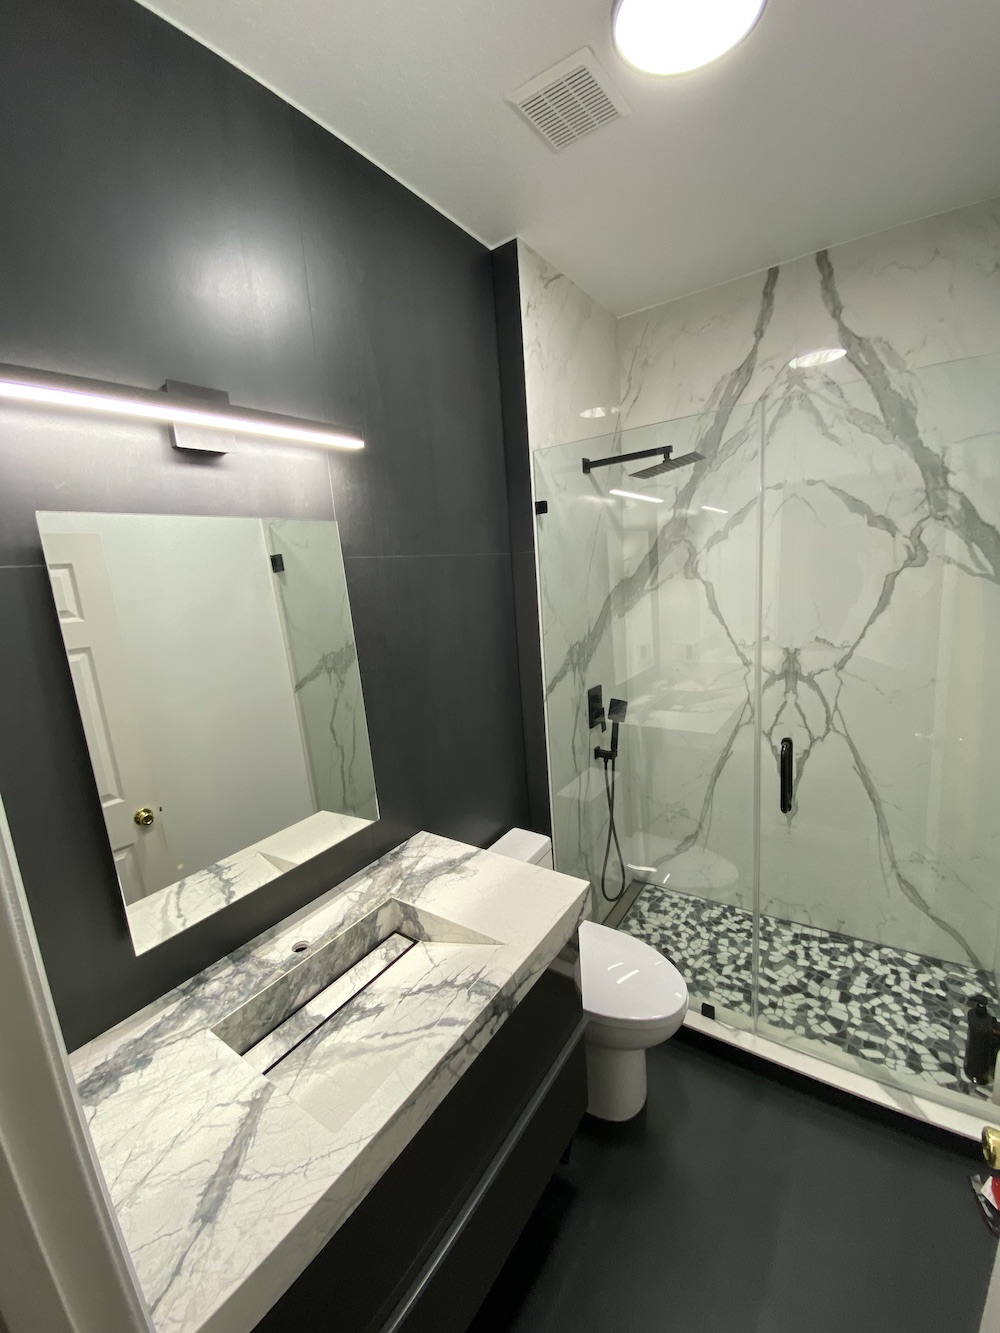 Porcelain bathroom full shower panels and vanity countertops – class with practicality